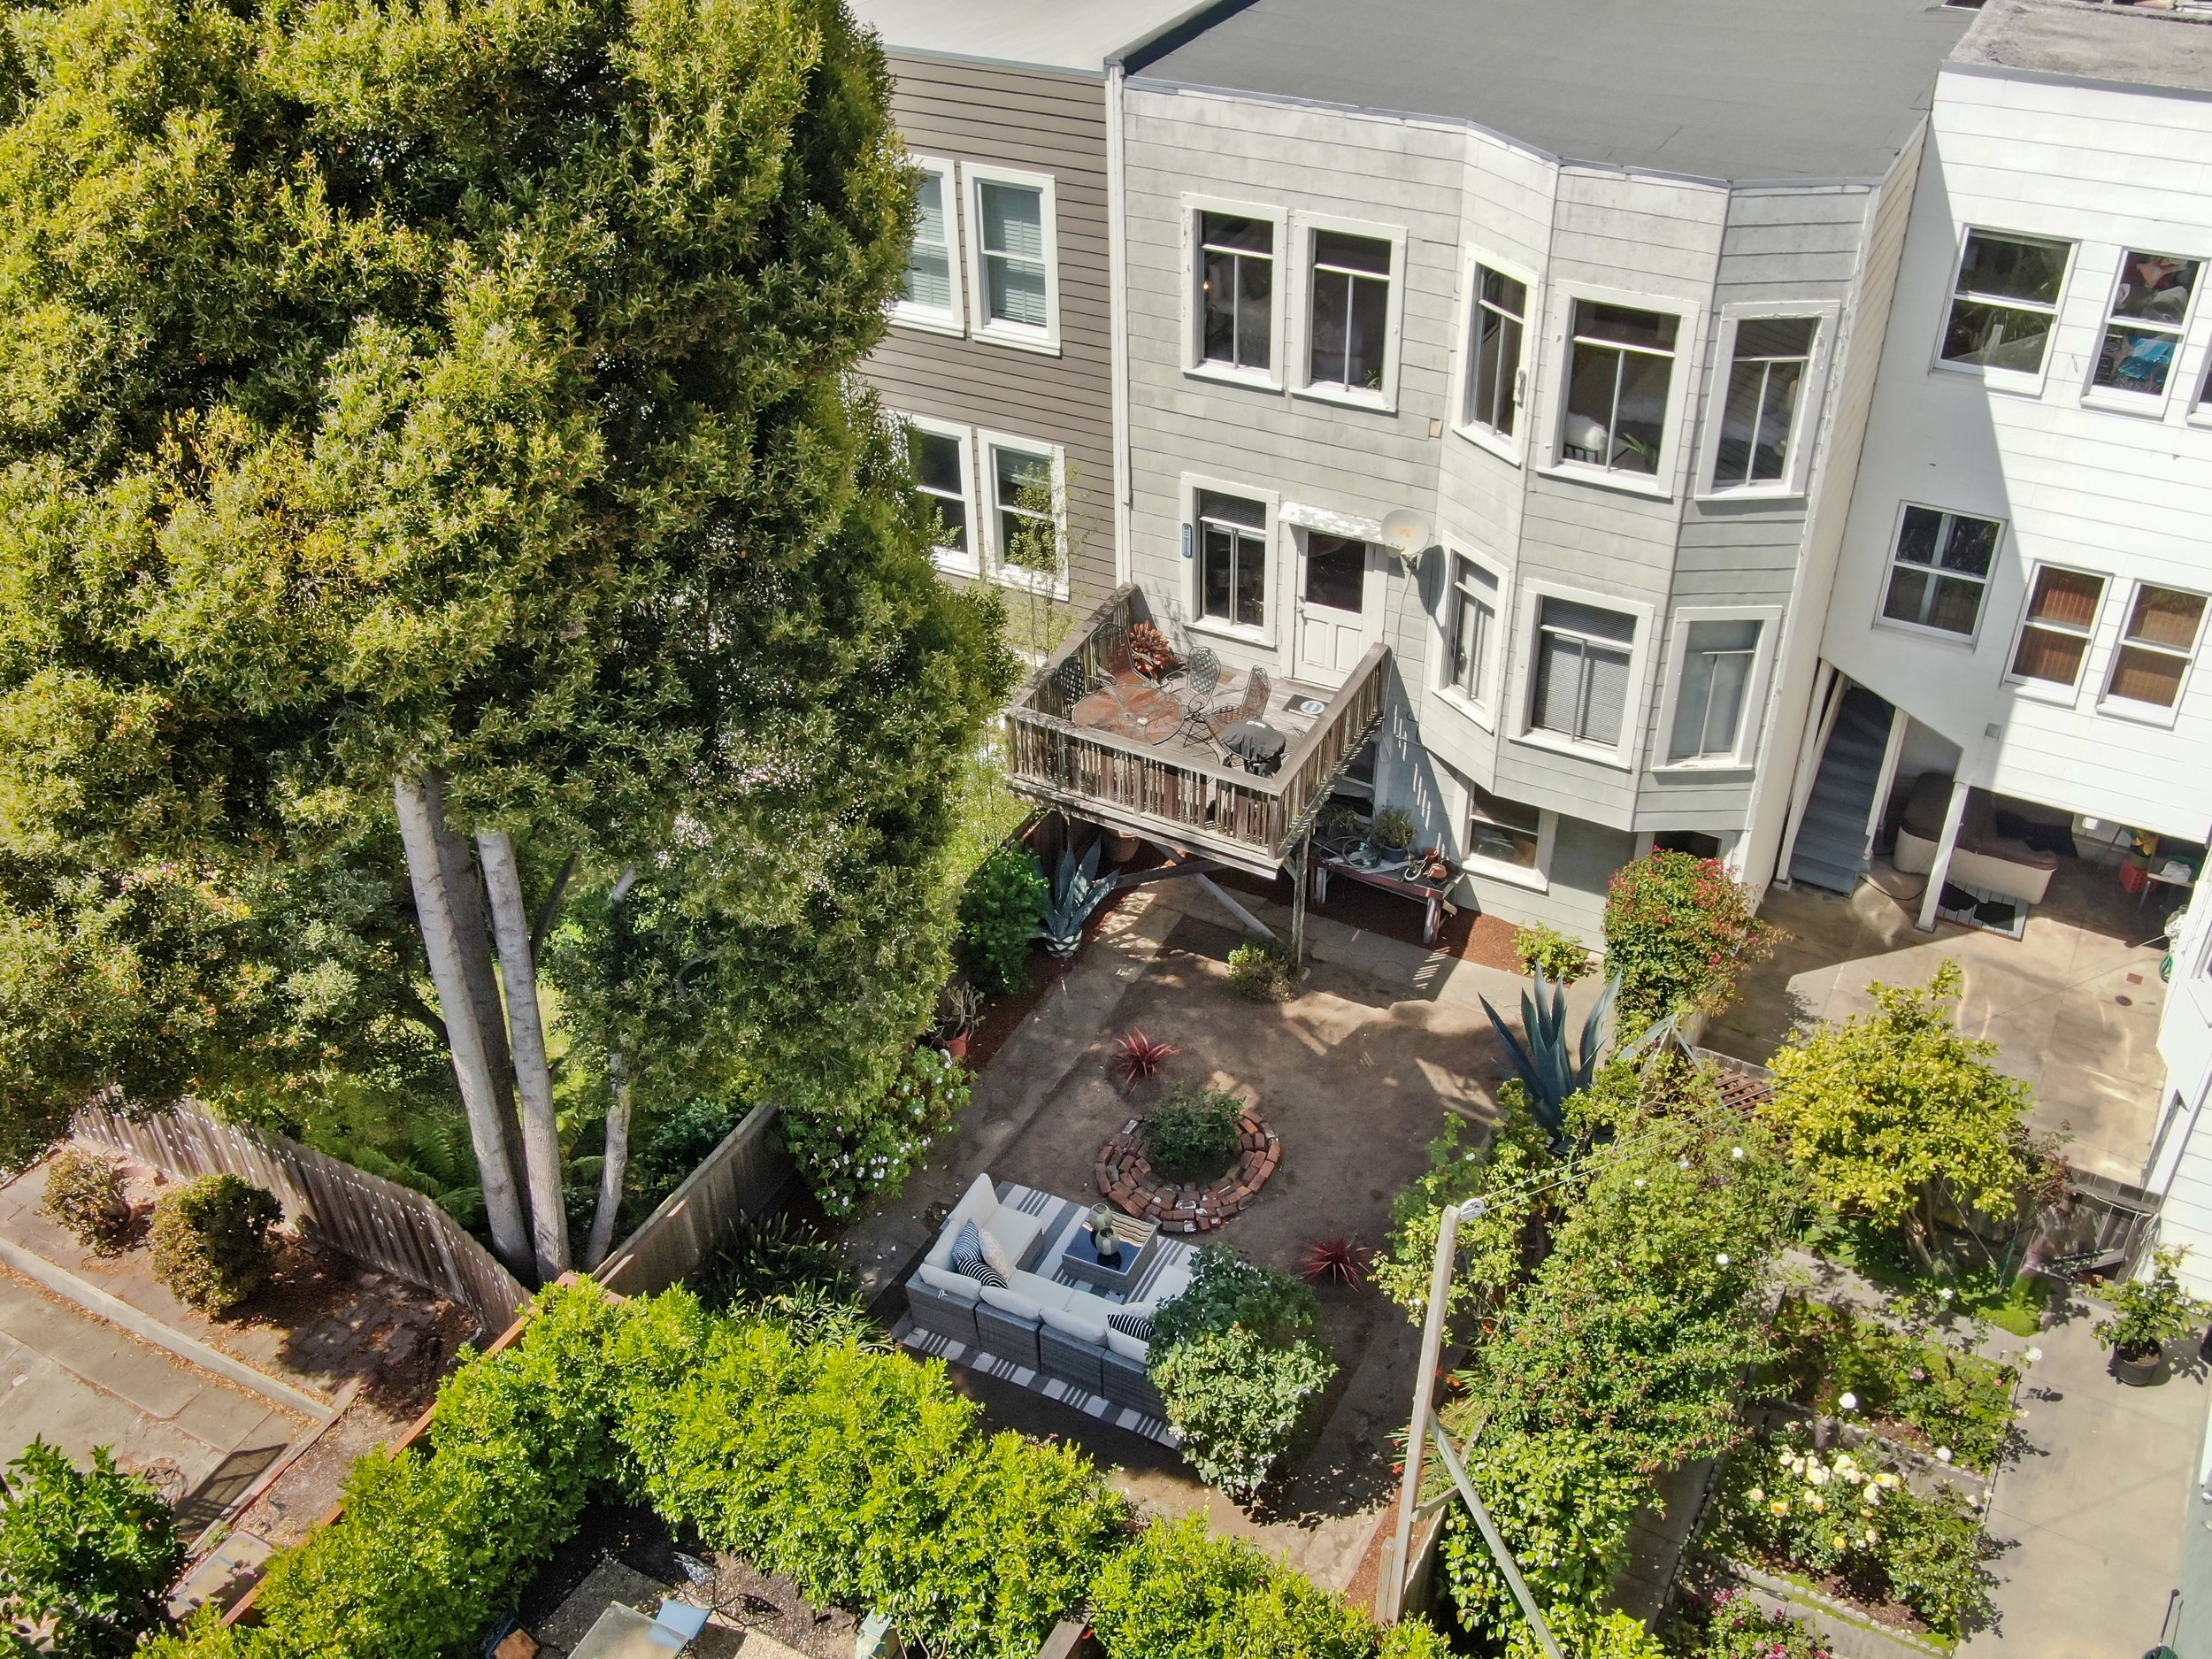 Property Photo: Aerial view of 637-639 Lake Street, looking down at the expansive back yard and deck